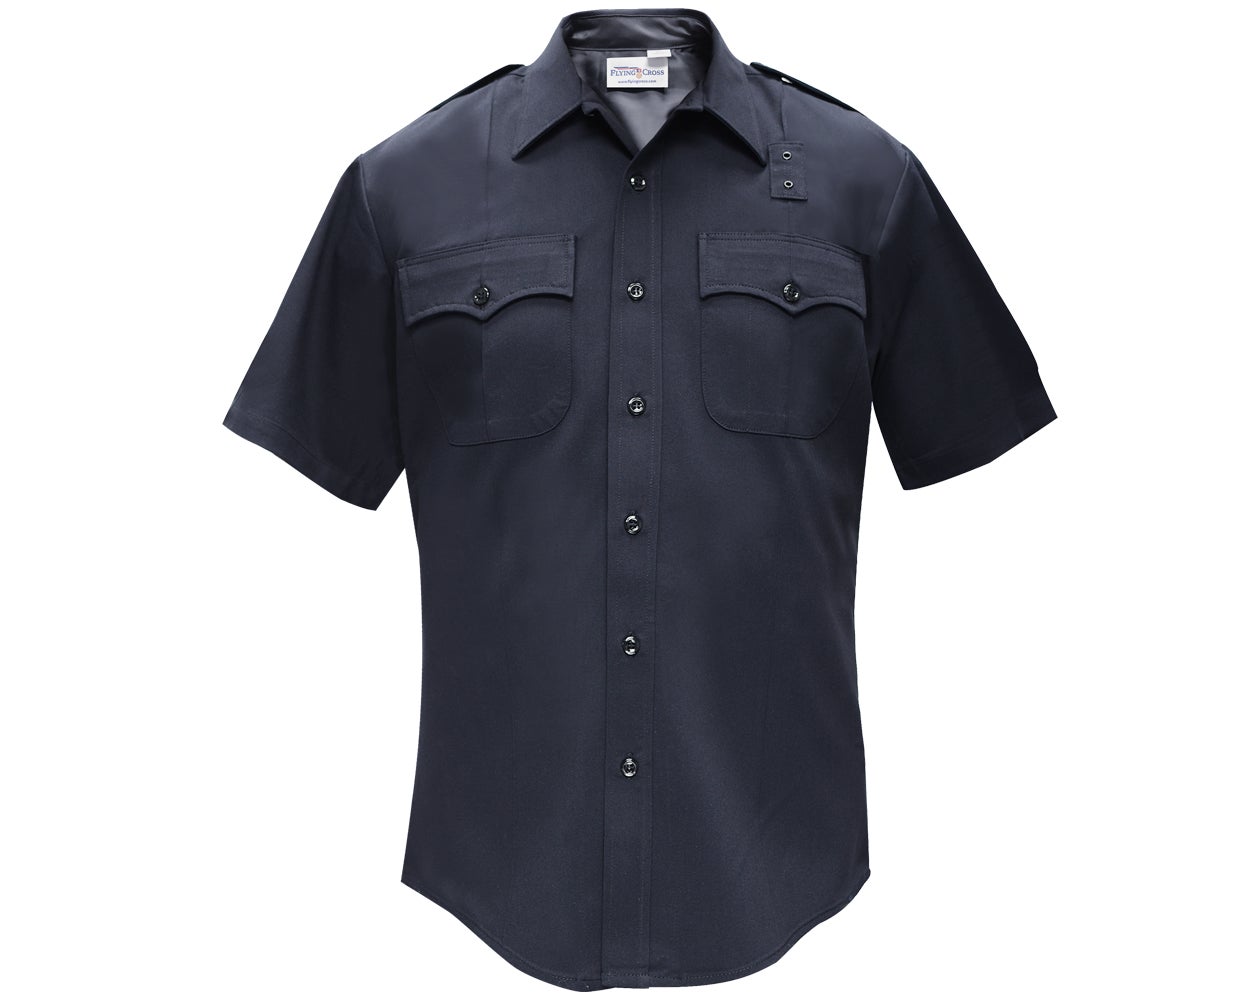 Flying Cross Deluxe Men's Tactical Short Sleeve Shirt 68% Poly/30% Rayon/2% Lycra®  with Com Ports - LAPD Navy 98R39 - Newest Products